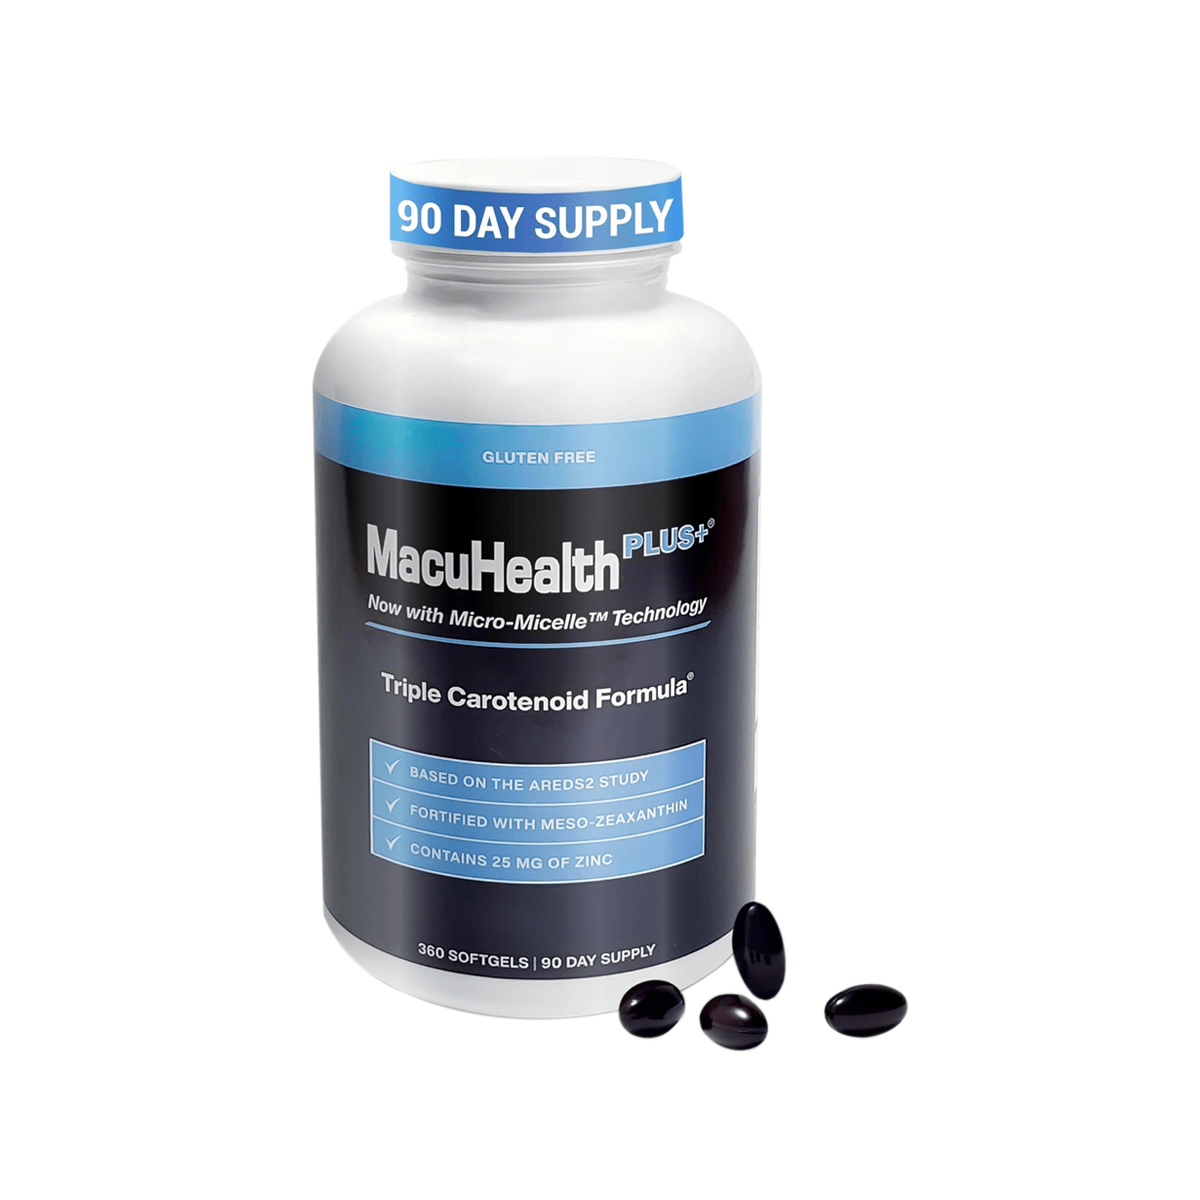 MacuHealth Plus+ Eye Supplement for Adults - Meso - Zeaxanthin, Lutein & Zeaxanthin, (90 Days Supply) Free 2 - Day Shipping - Dryeye Rescue